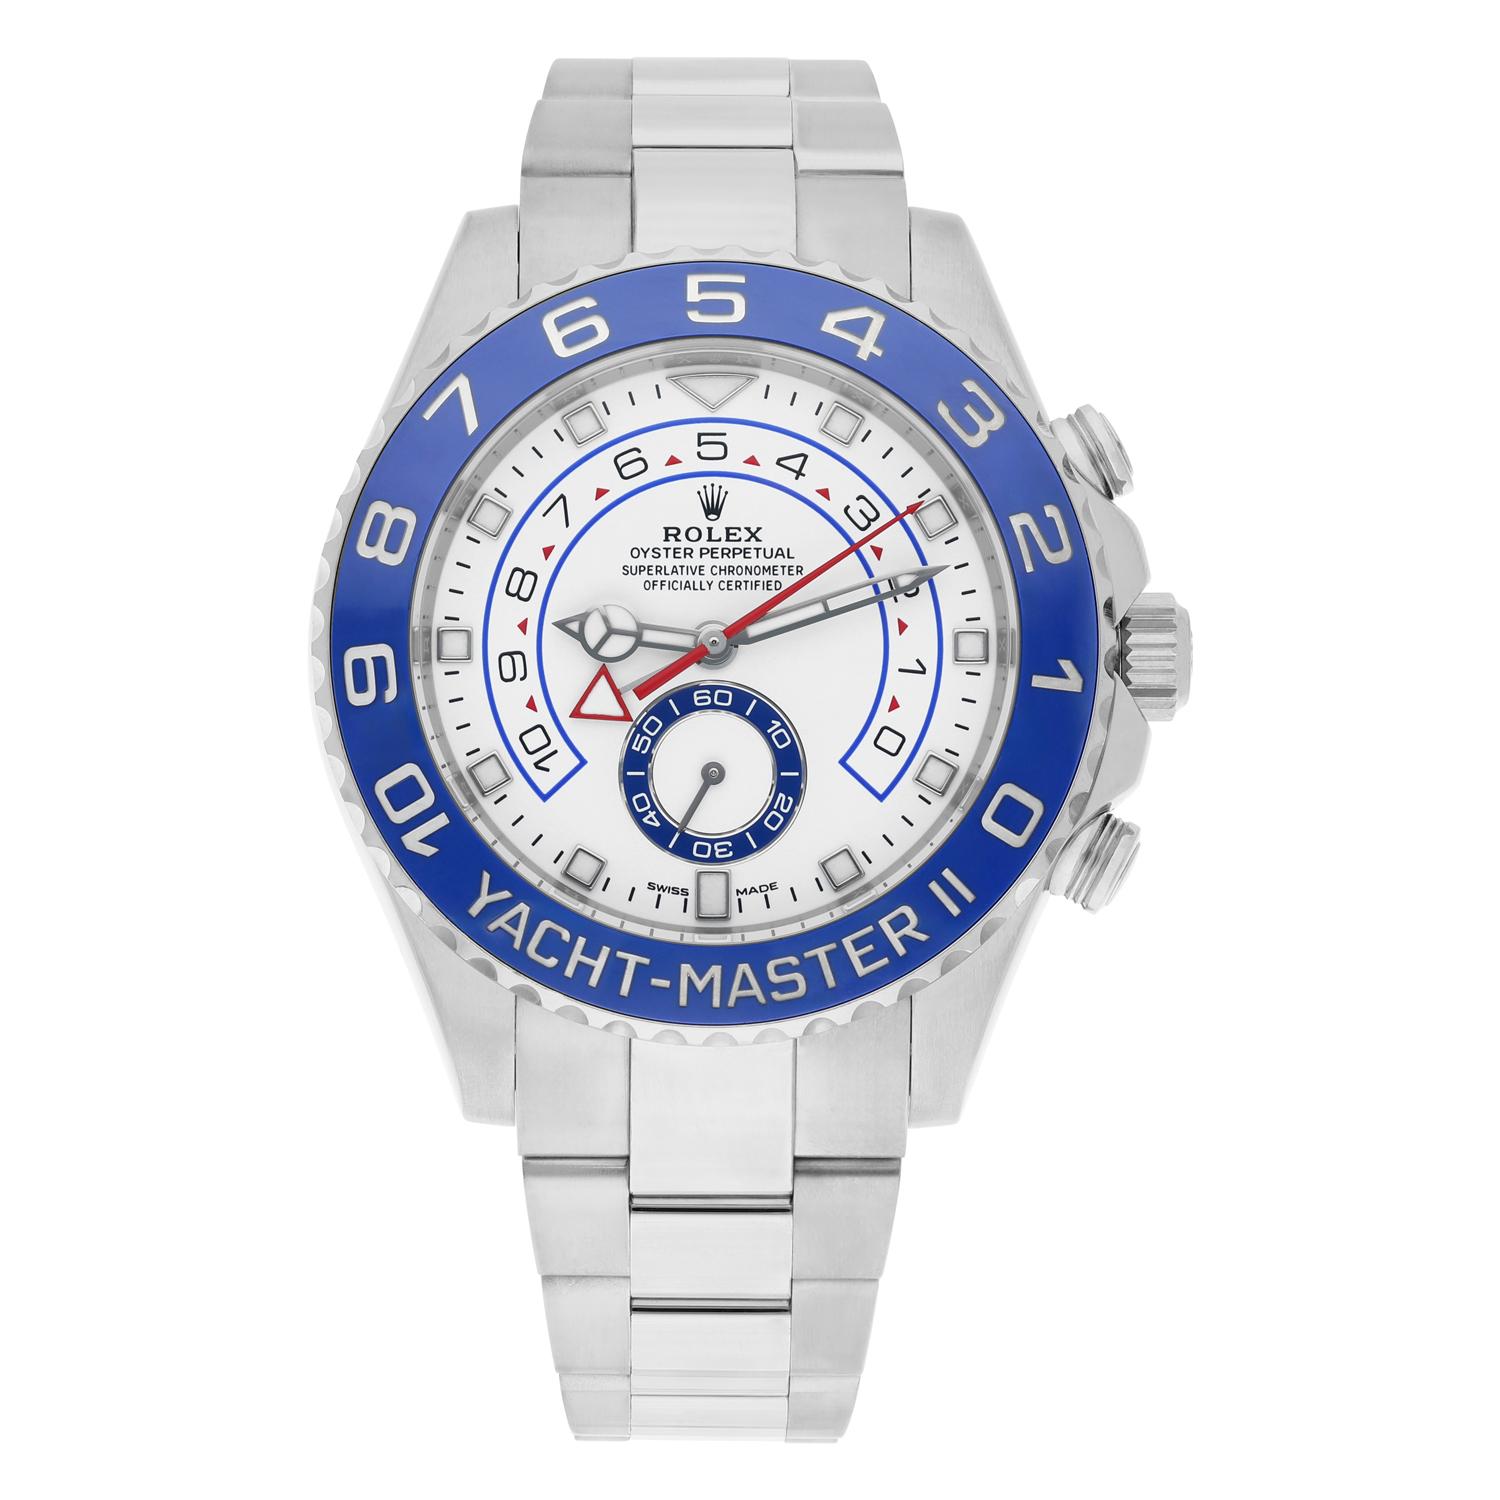 Rolex Yacht-Master II 44mm Steel White Dial Automatic Mens Watch 116680
Mercedes Hands 

This watch has been professionally polished and does not have any visible scratches or blemishes. It is a genuine Rolex which has been inspected to verify